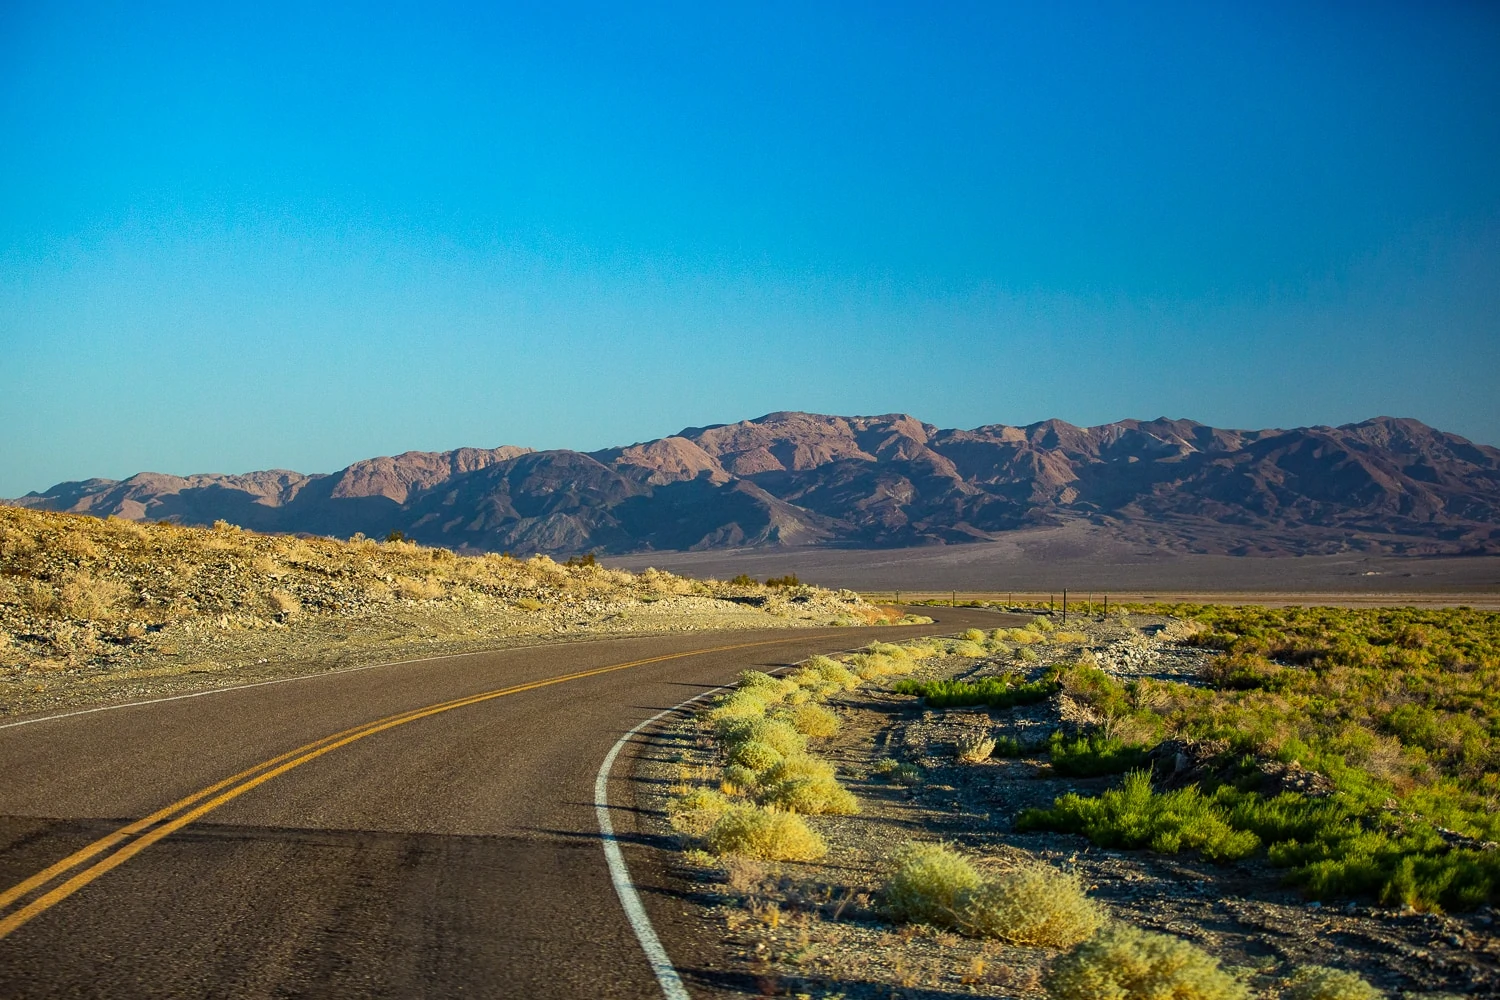 A road curves towards distant mountains in Death Valley National Park.